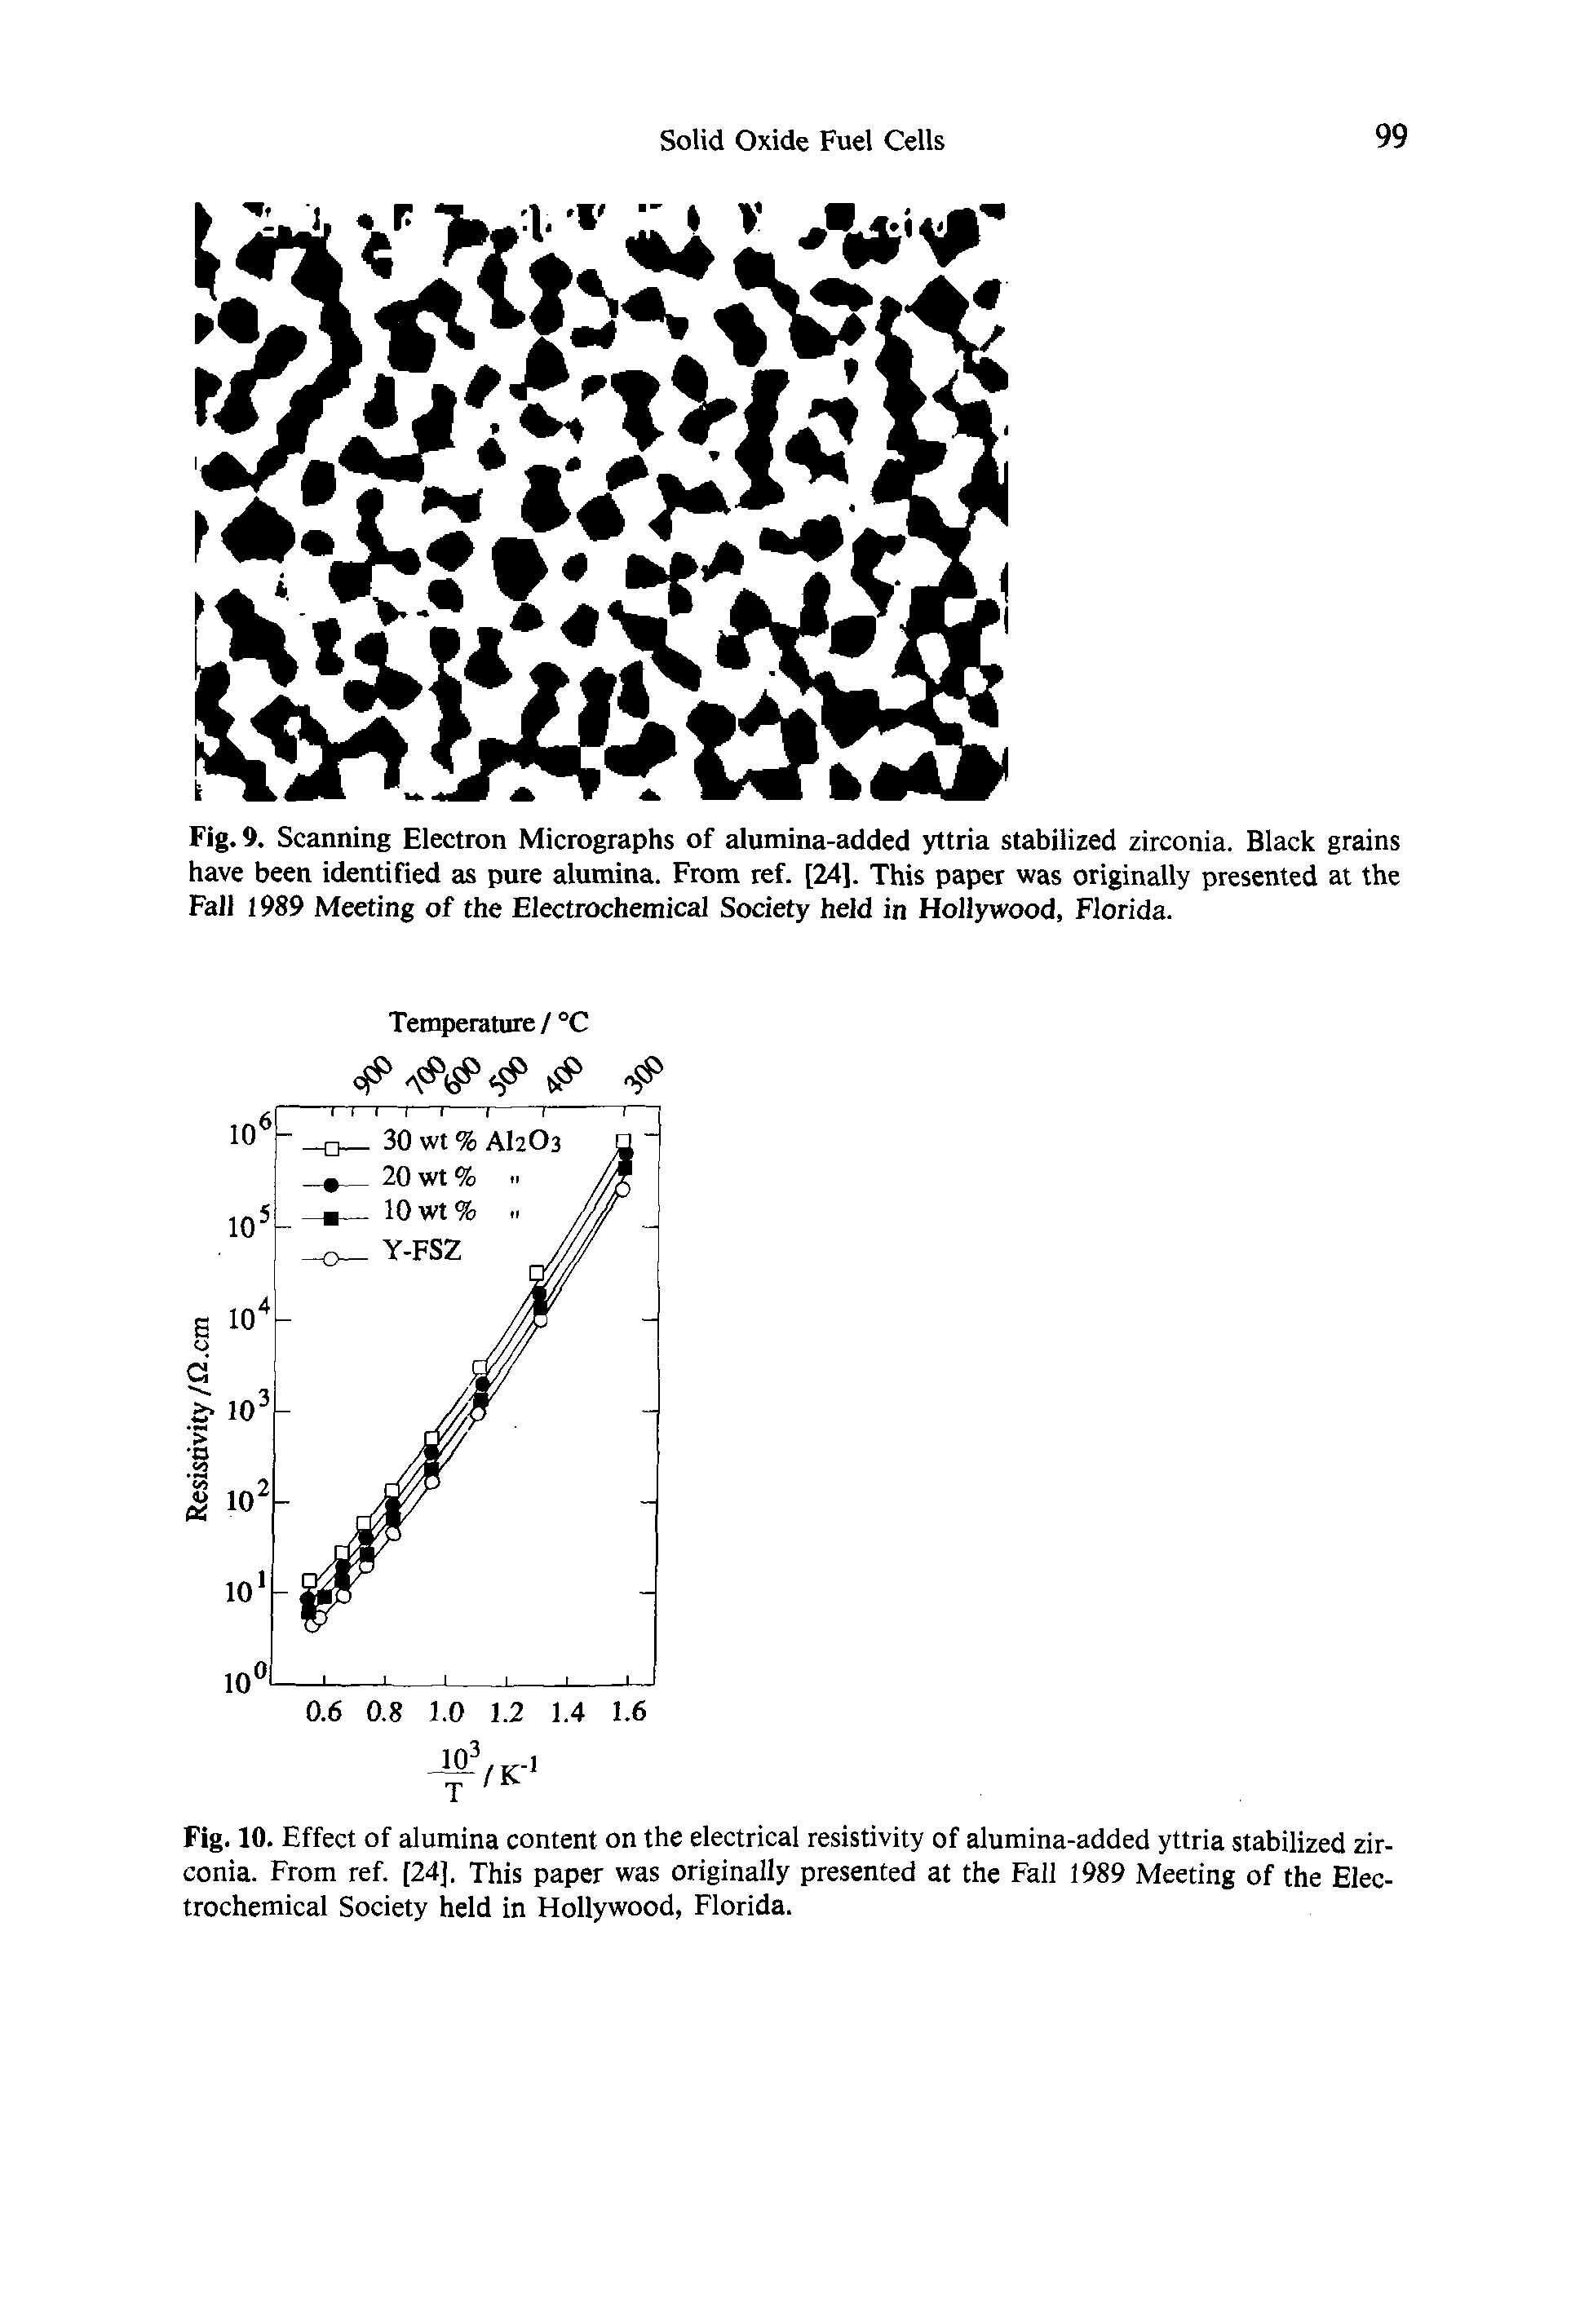 Fig. 10. Effect of alumina content on the electrical resistivity of alumina-added yttria stabilized zirconia. From ref. [24], This paper was originally presented at the Fall 1989 Meeting of the Electrochemical Society held in Hollywood, Florida.